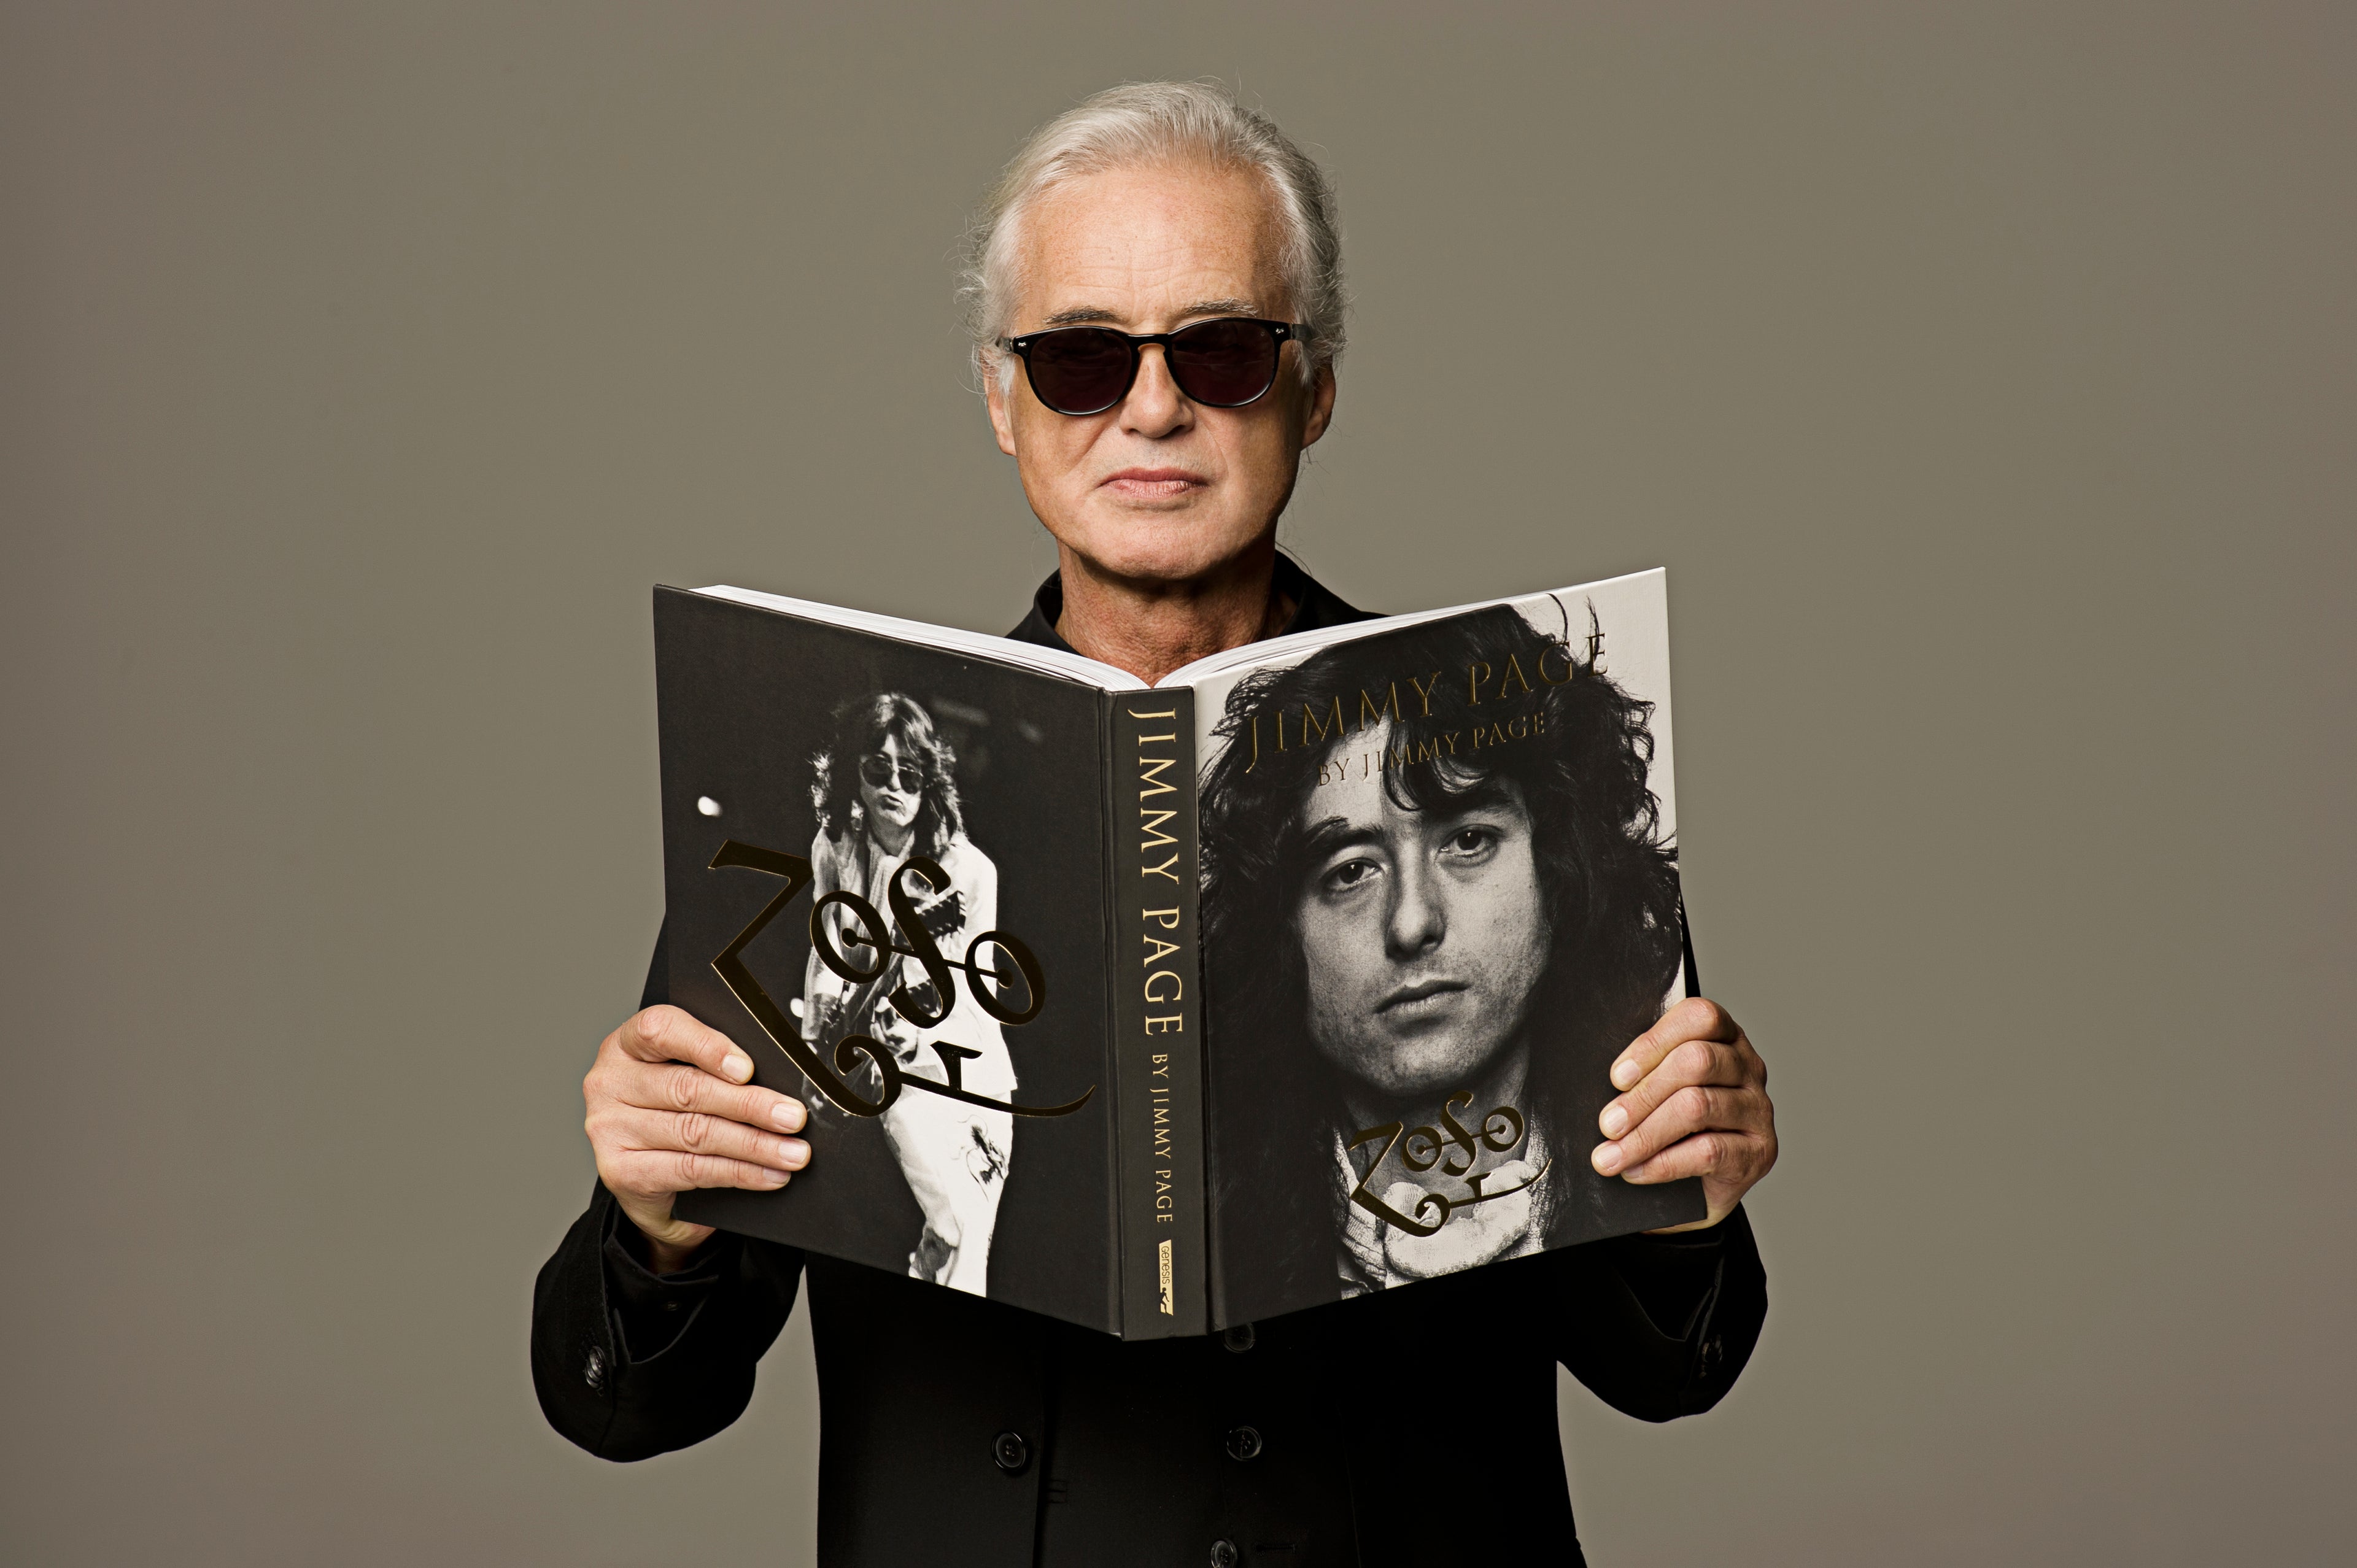 Jimmy Page with his book published by Genesis Publications Jimmy Page by Jimmy Page